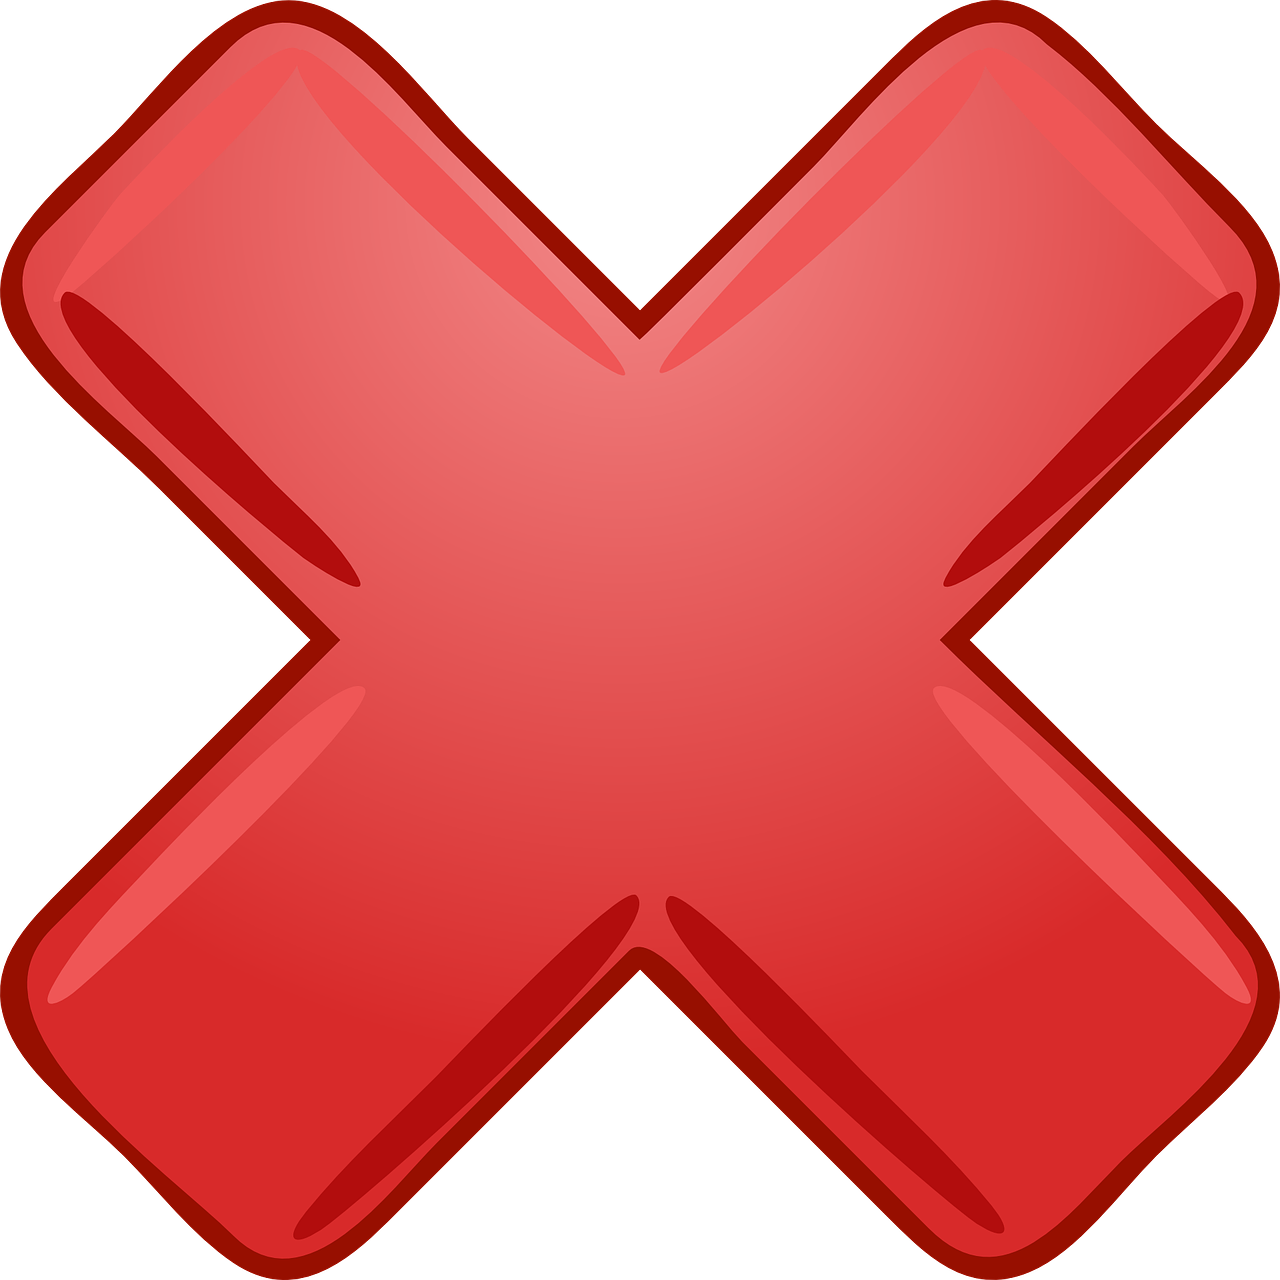 A Red X Symbol On A Black Background